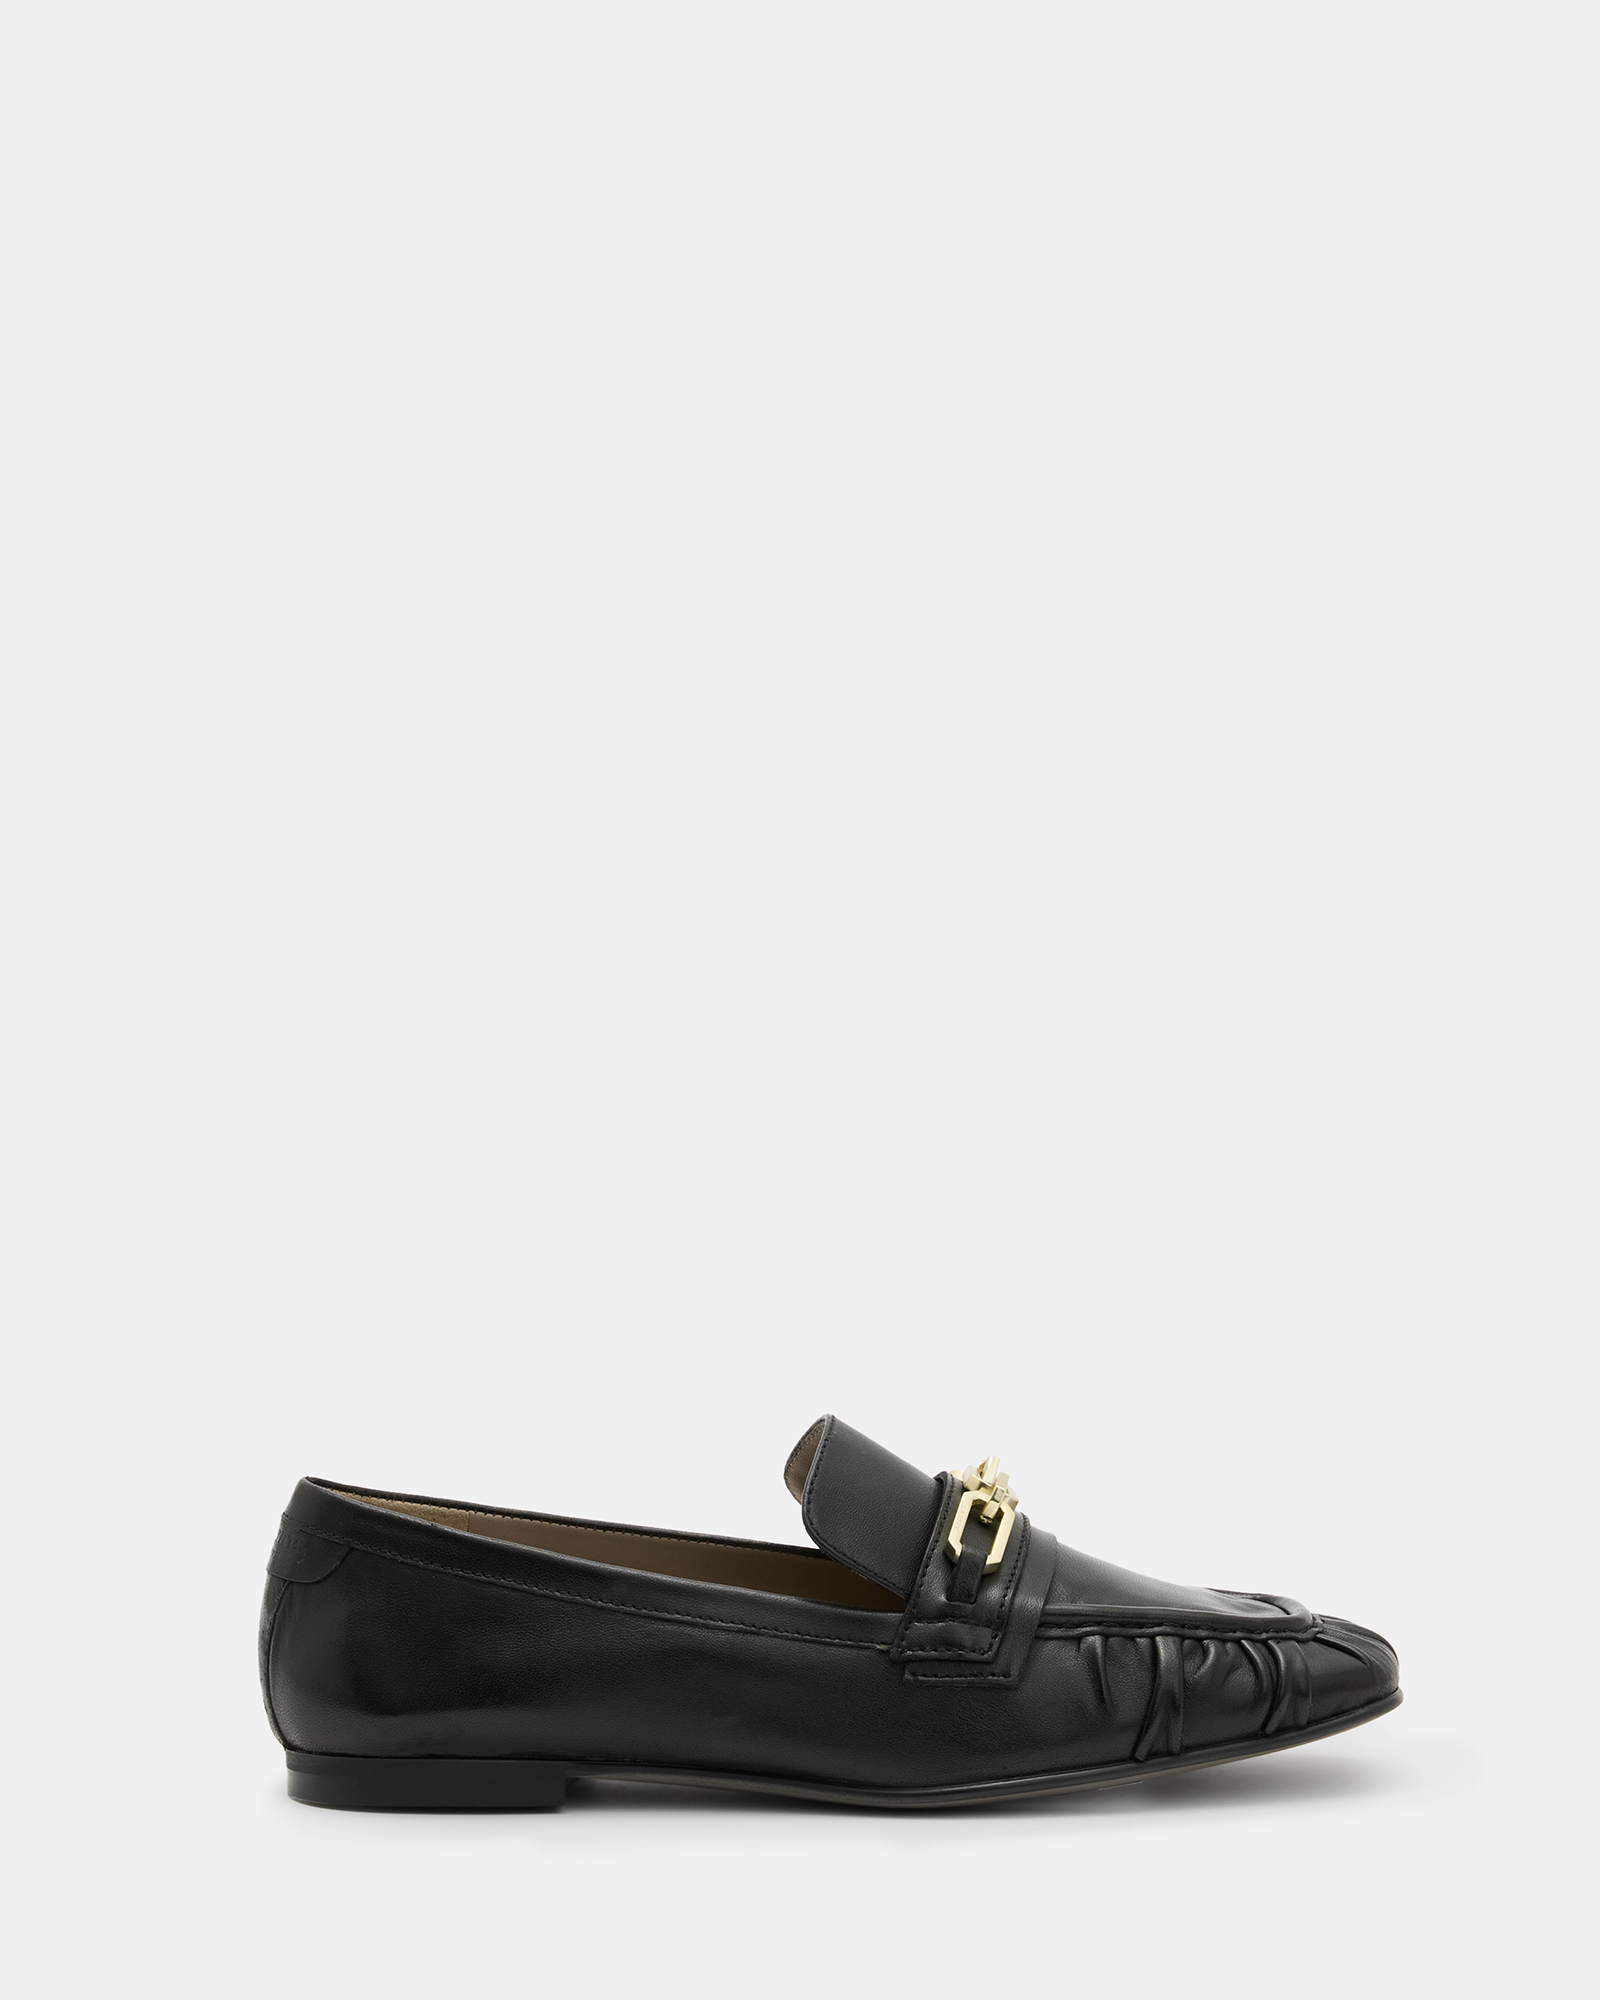 AllSaints Sapphire Leather Chain Loafer Shoes